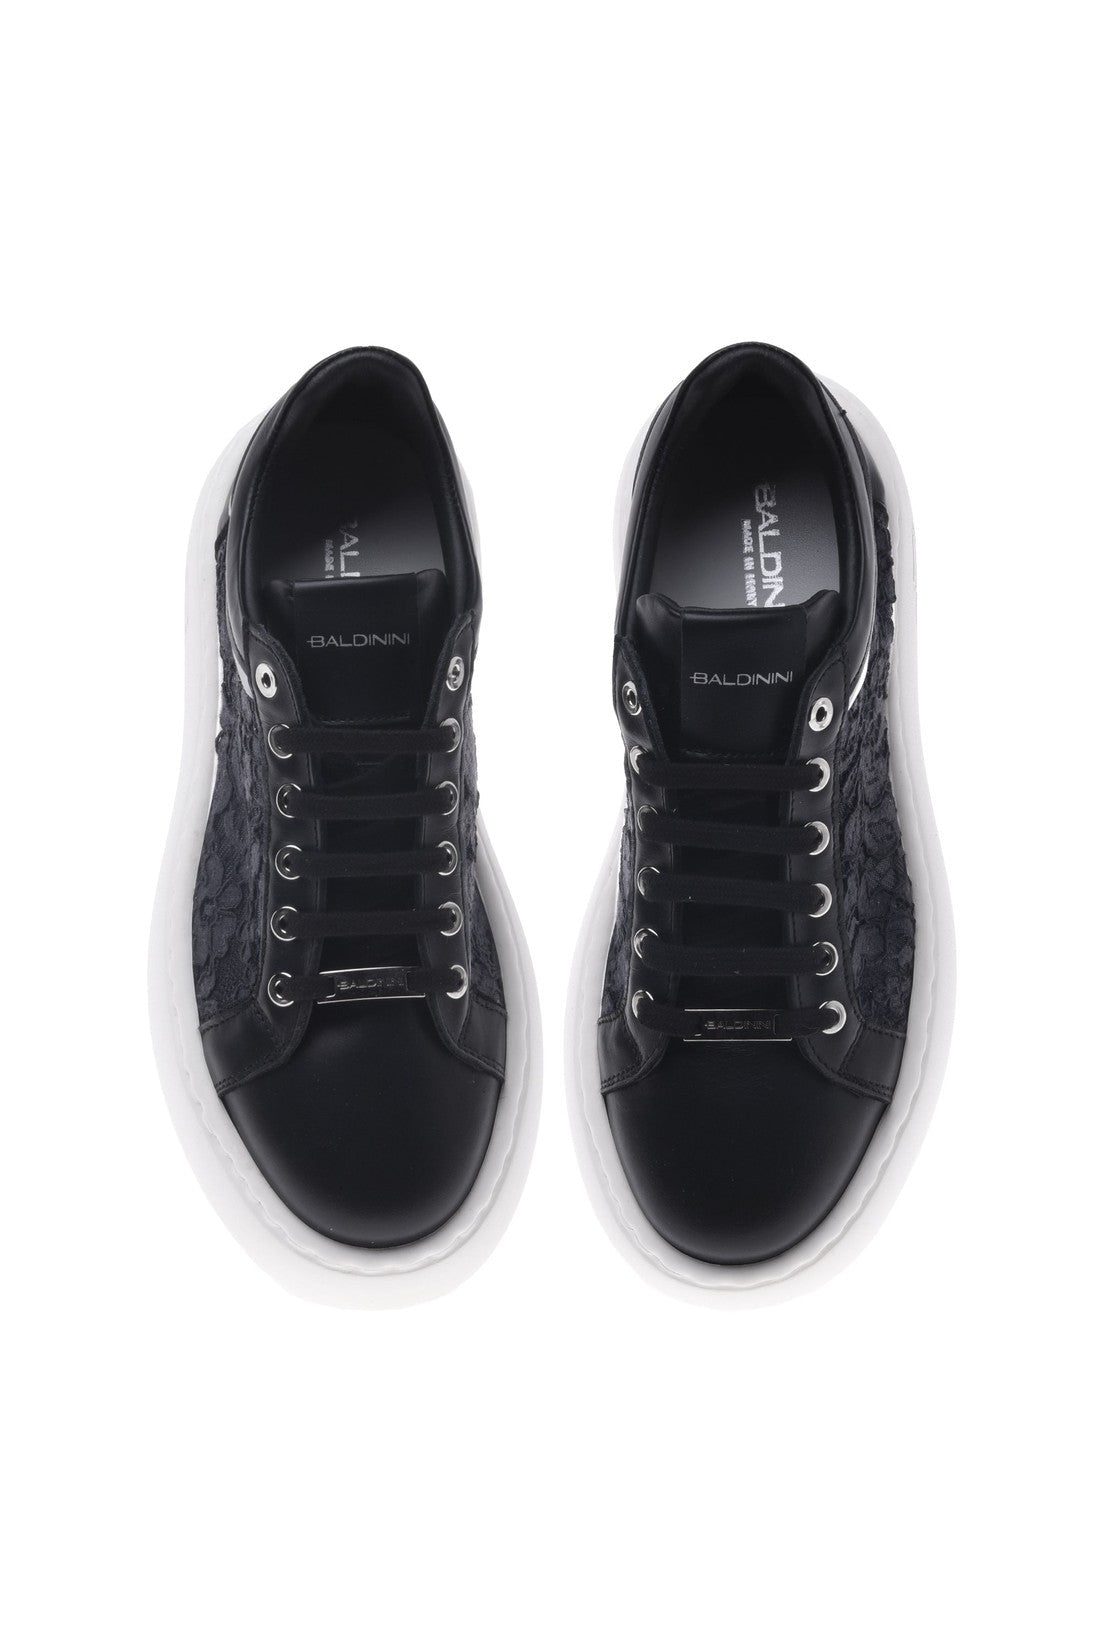 Sneaker in black nappa leather and lace